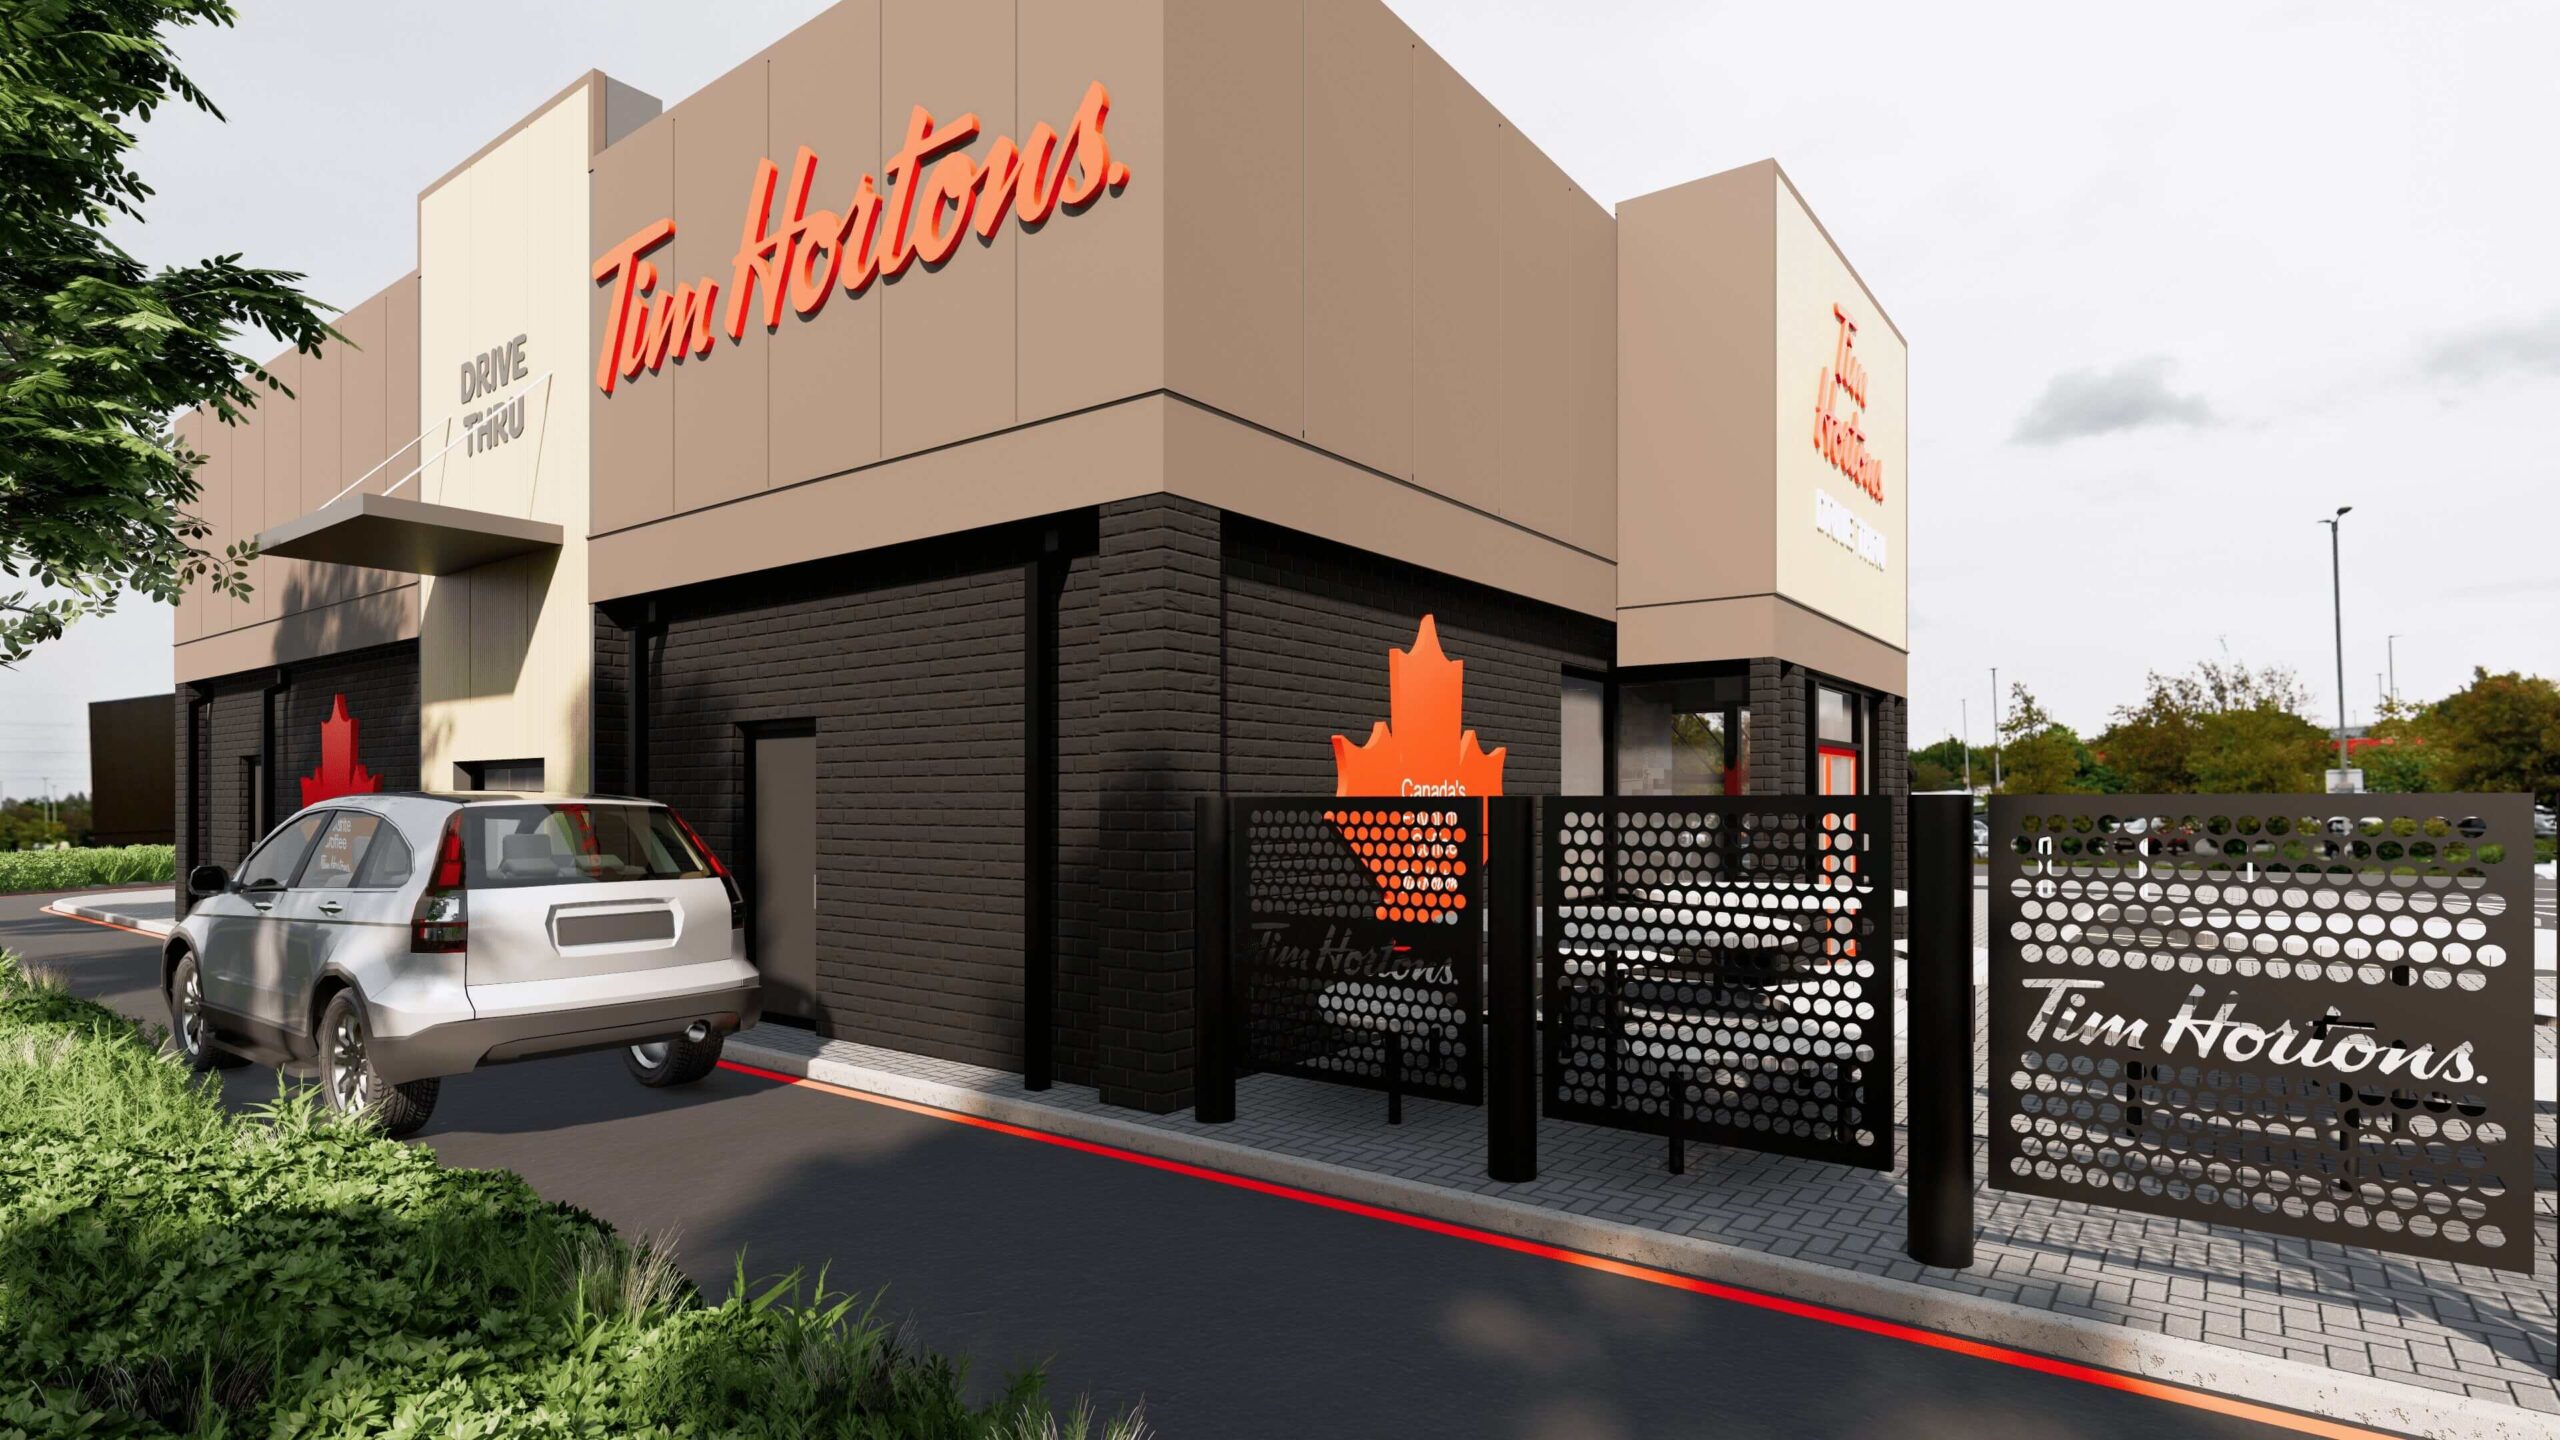 Architectural BIM services with Brand specification & Visualization for Restaurant Chain